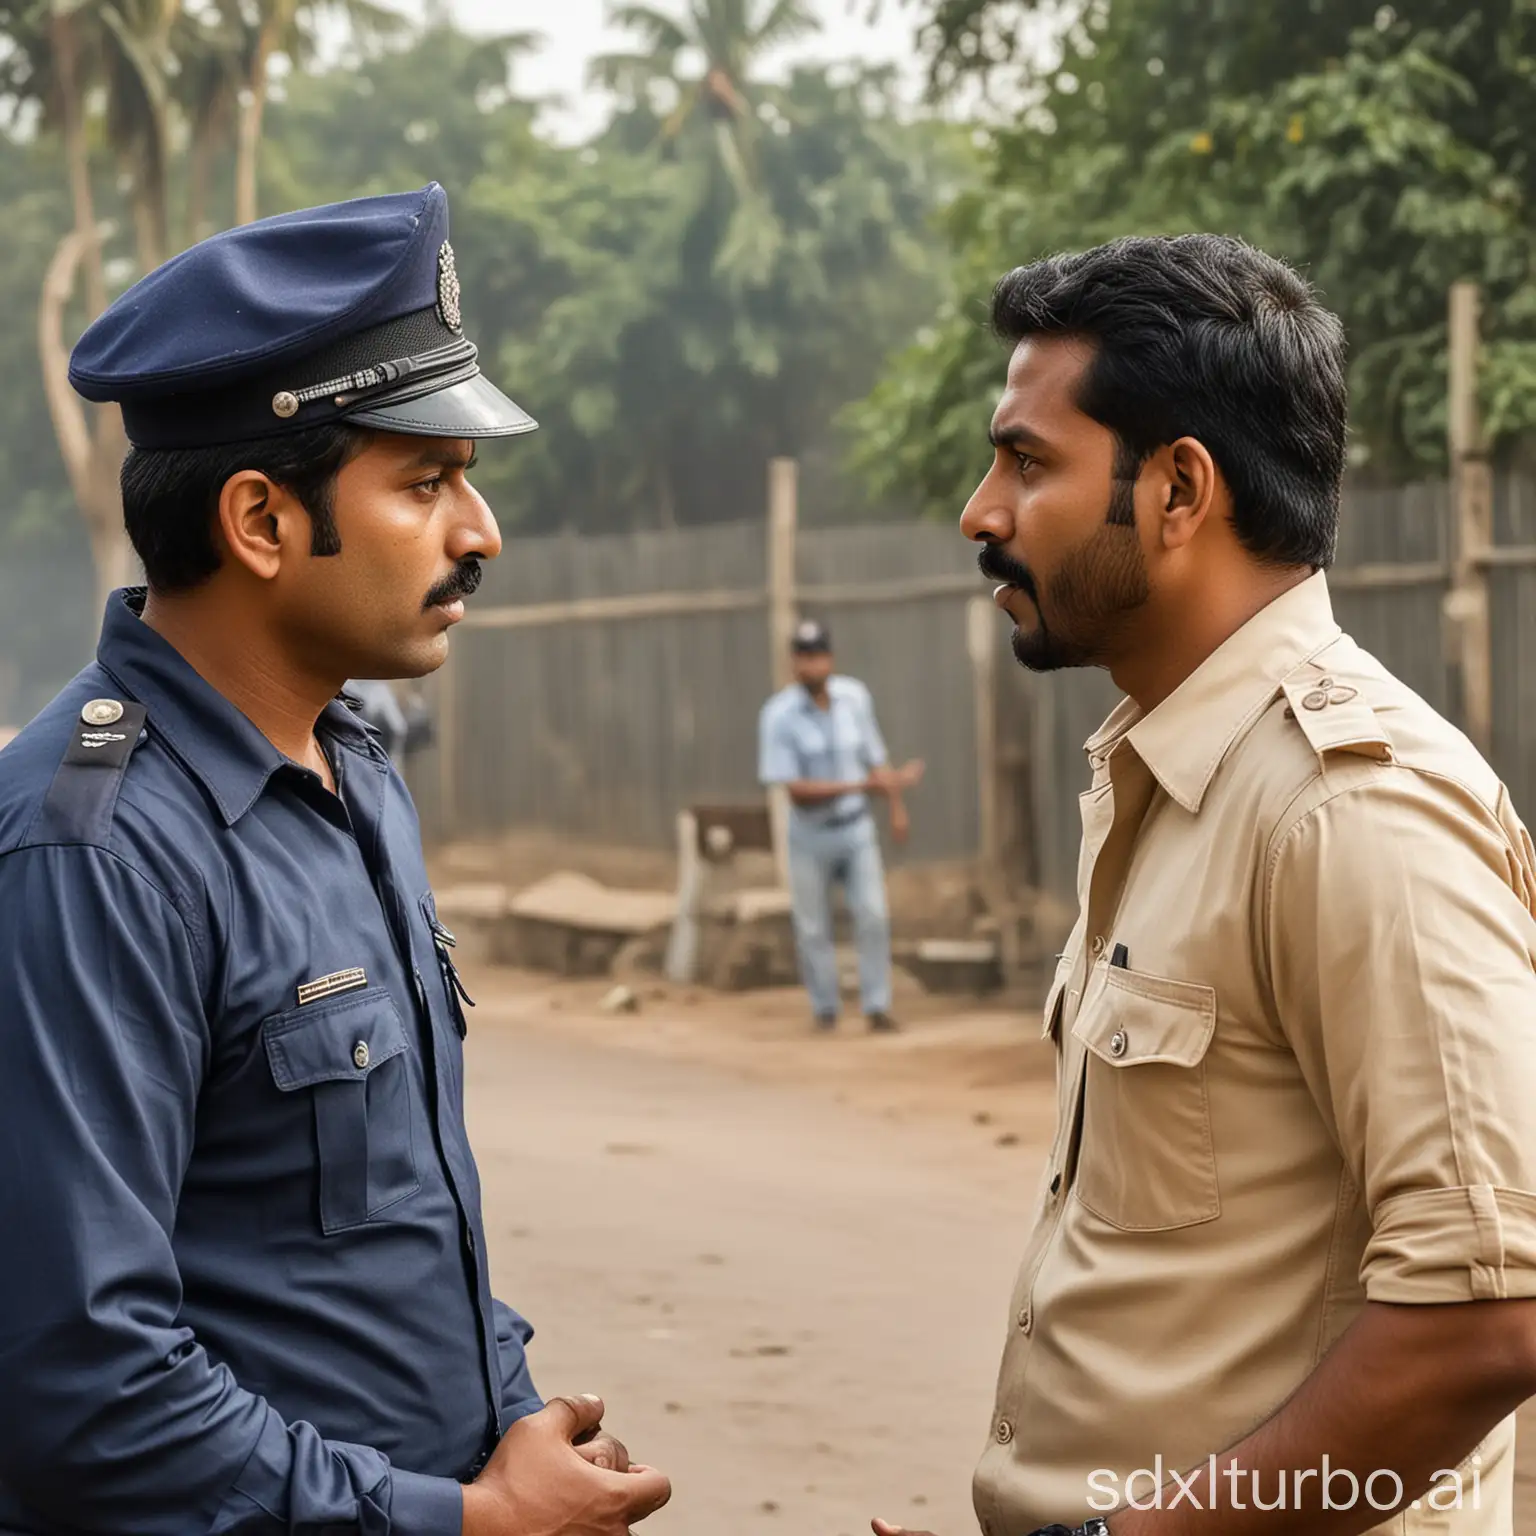 An Indian gangster having casual conversation with a police man